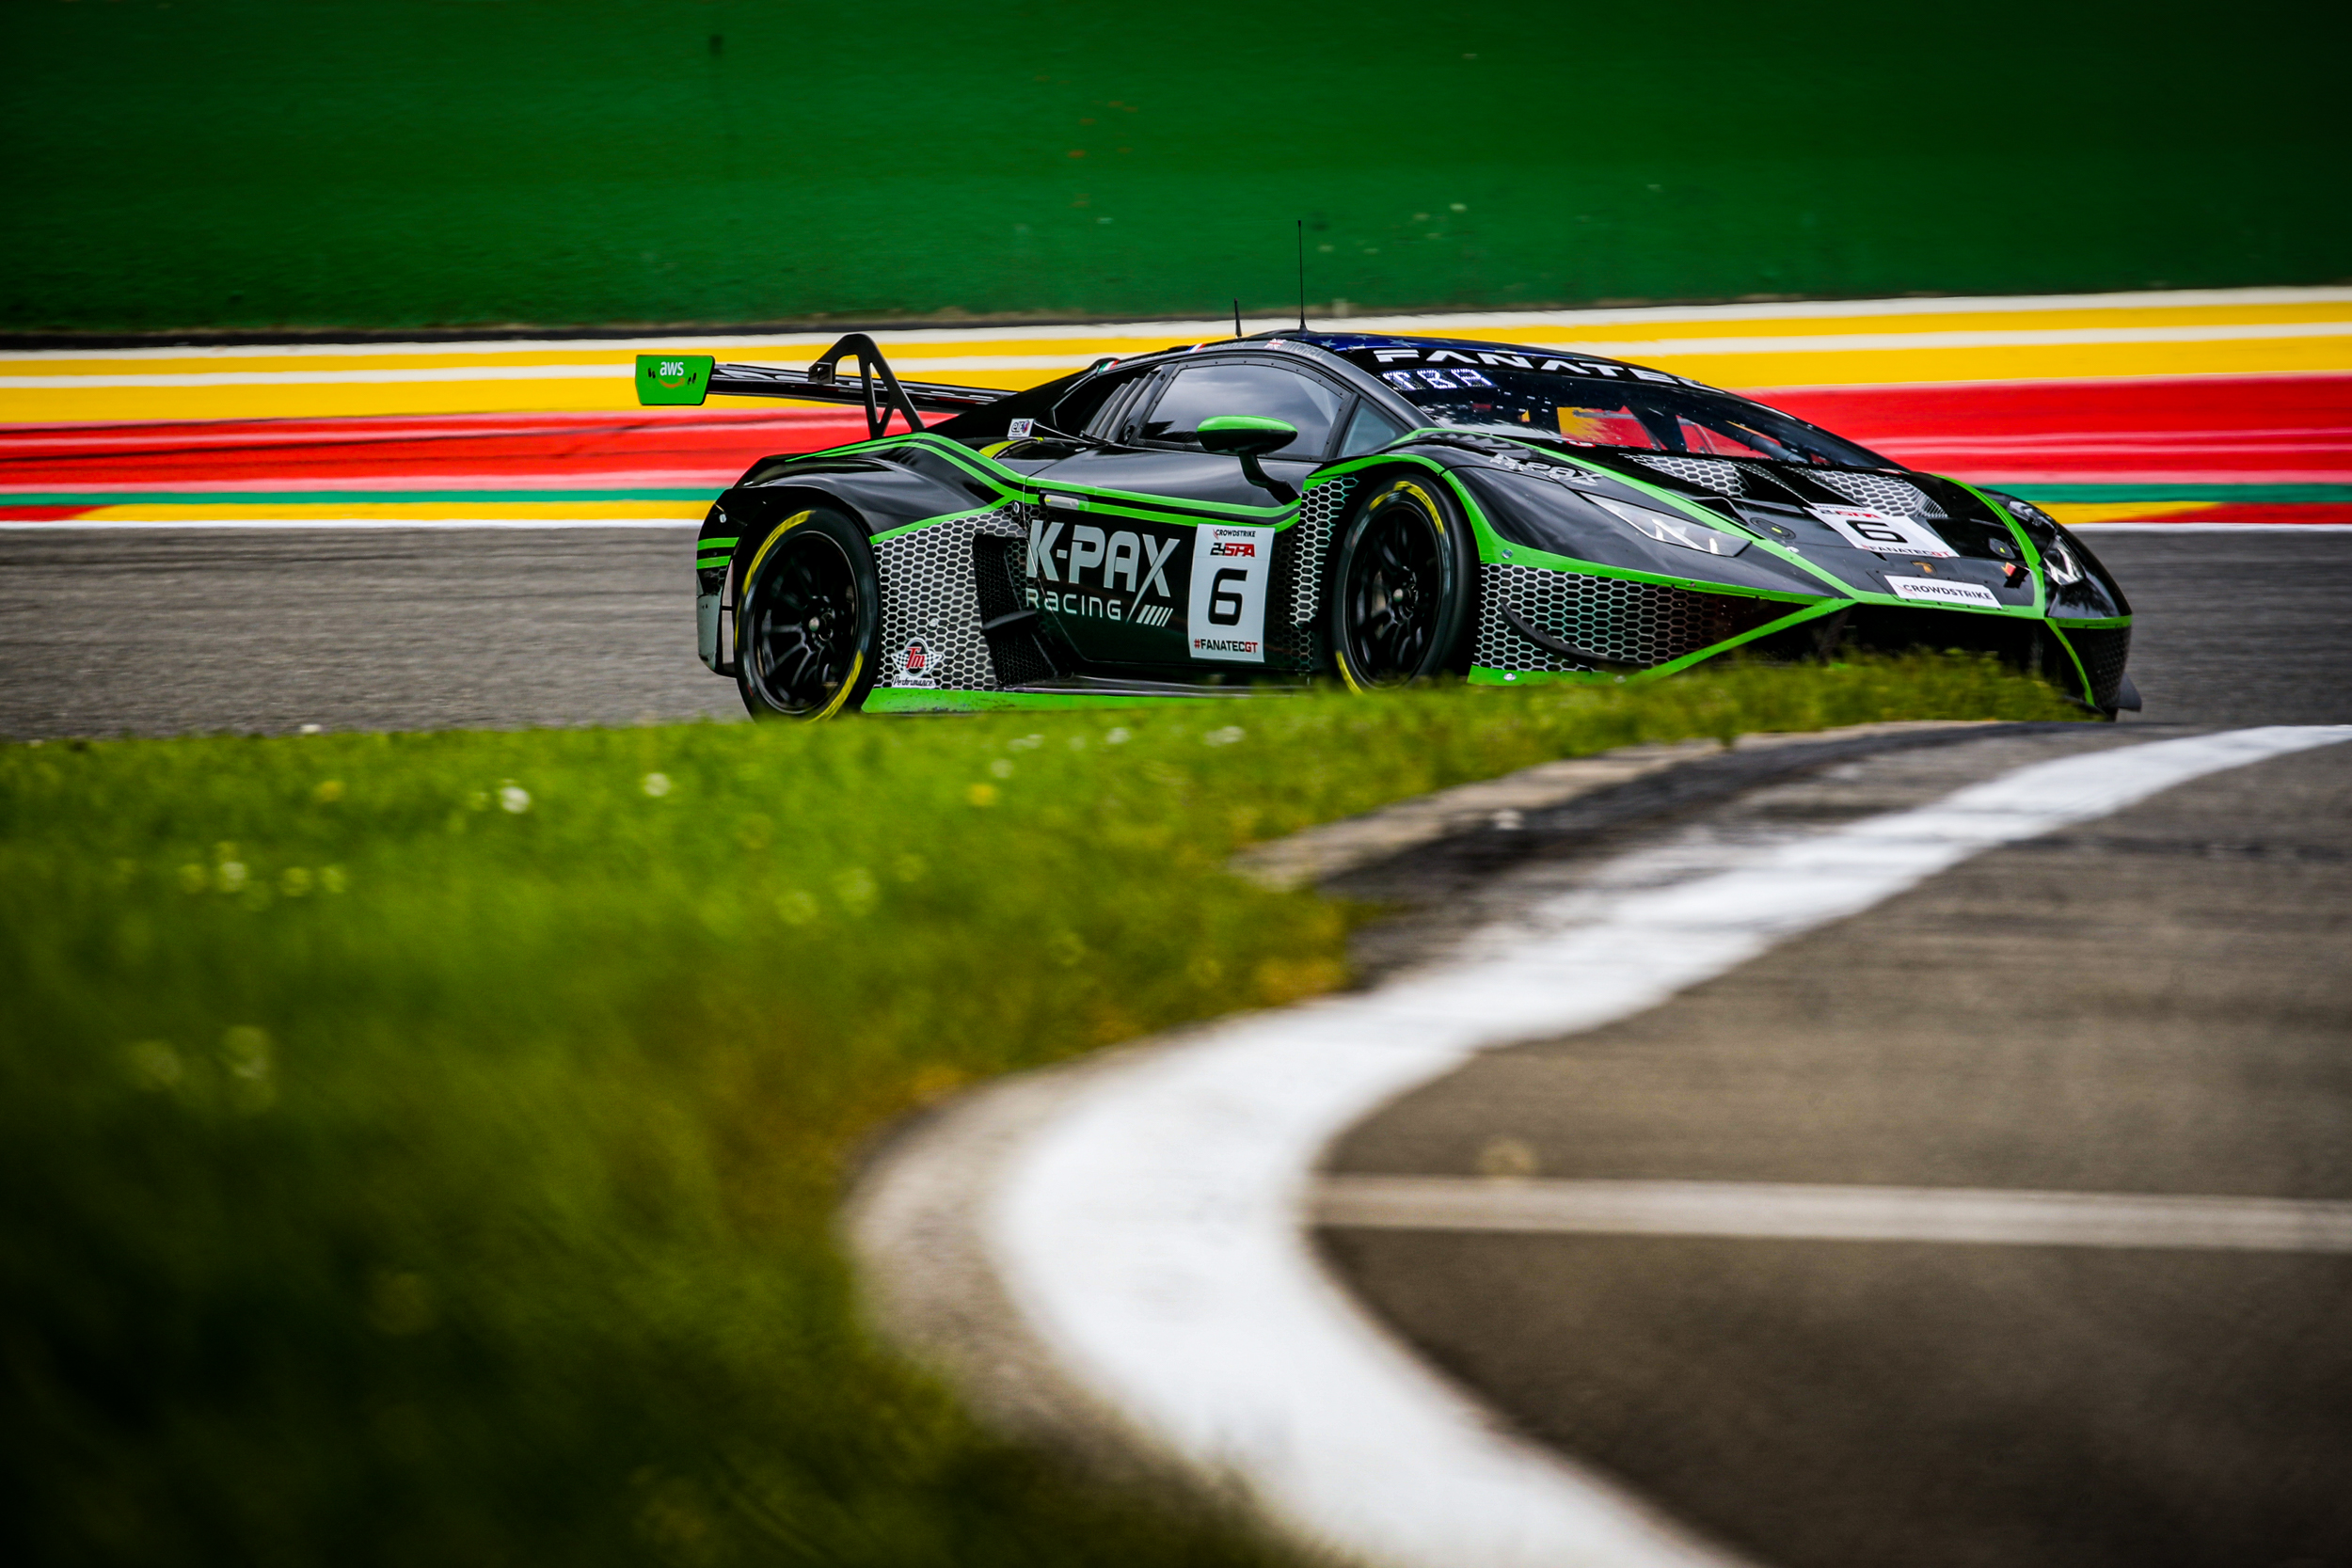 24 hours for glory: K-PAX Racing set for Spa spectacular